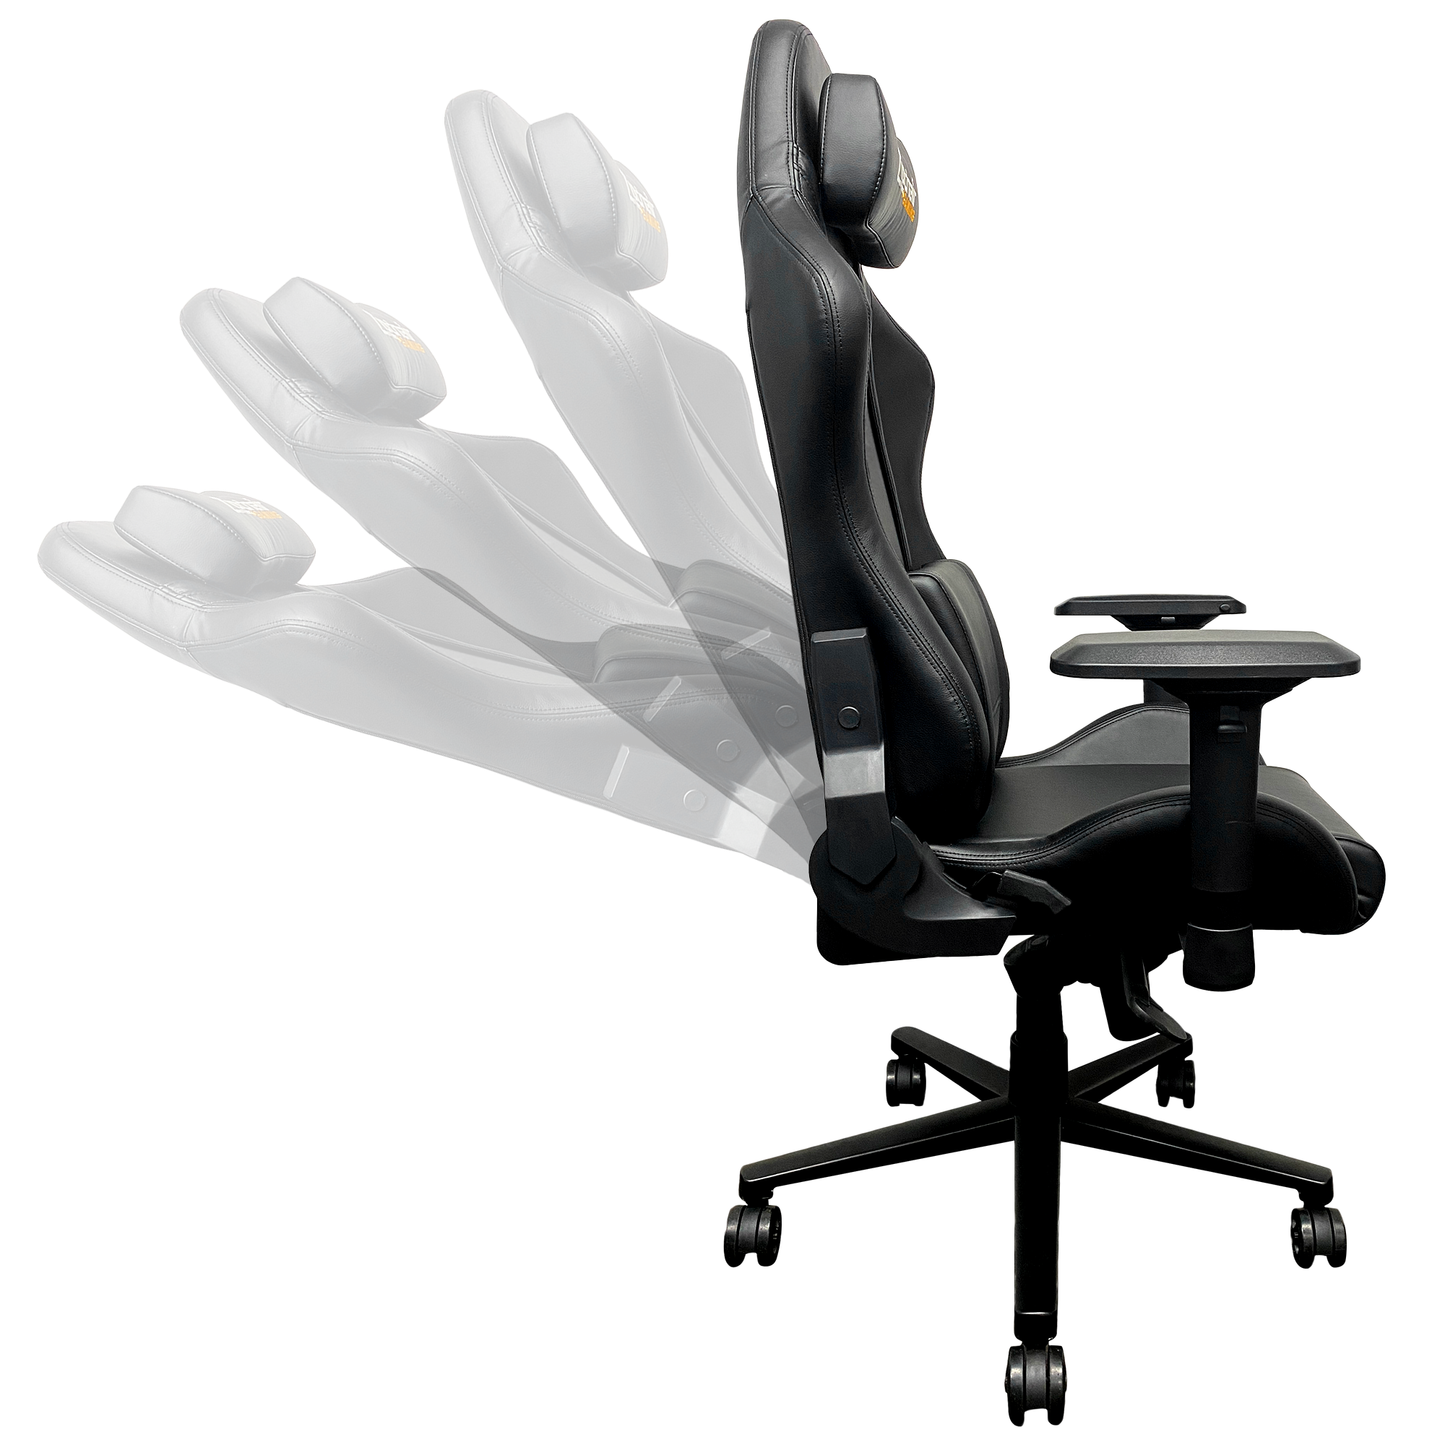 Xpression Pro Gaming Chair with Corvette C1 logo